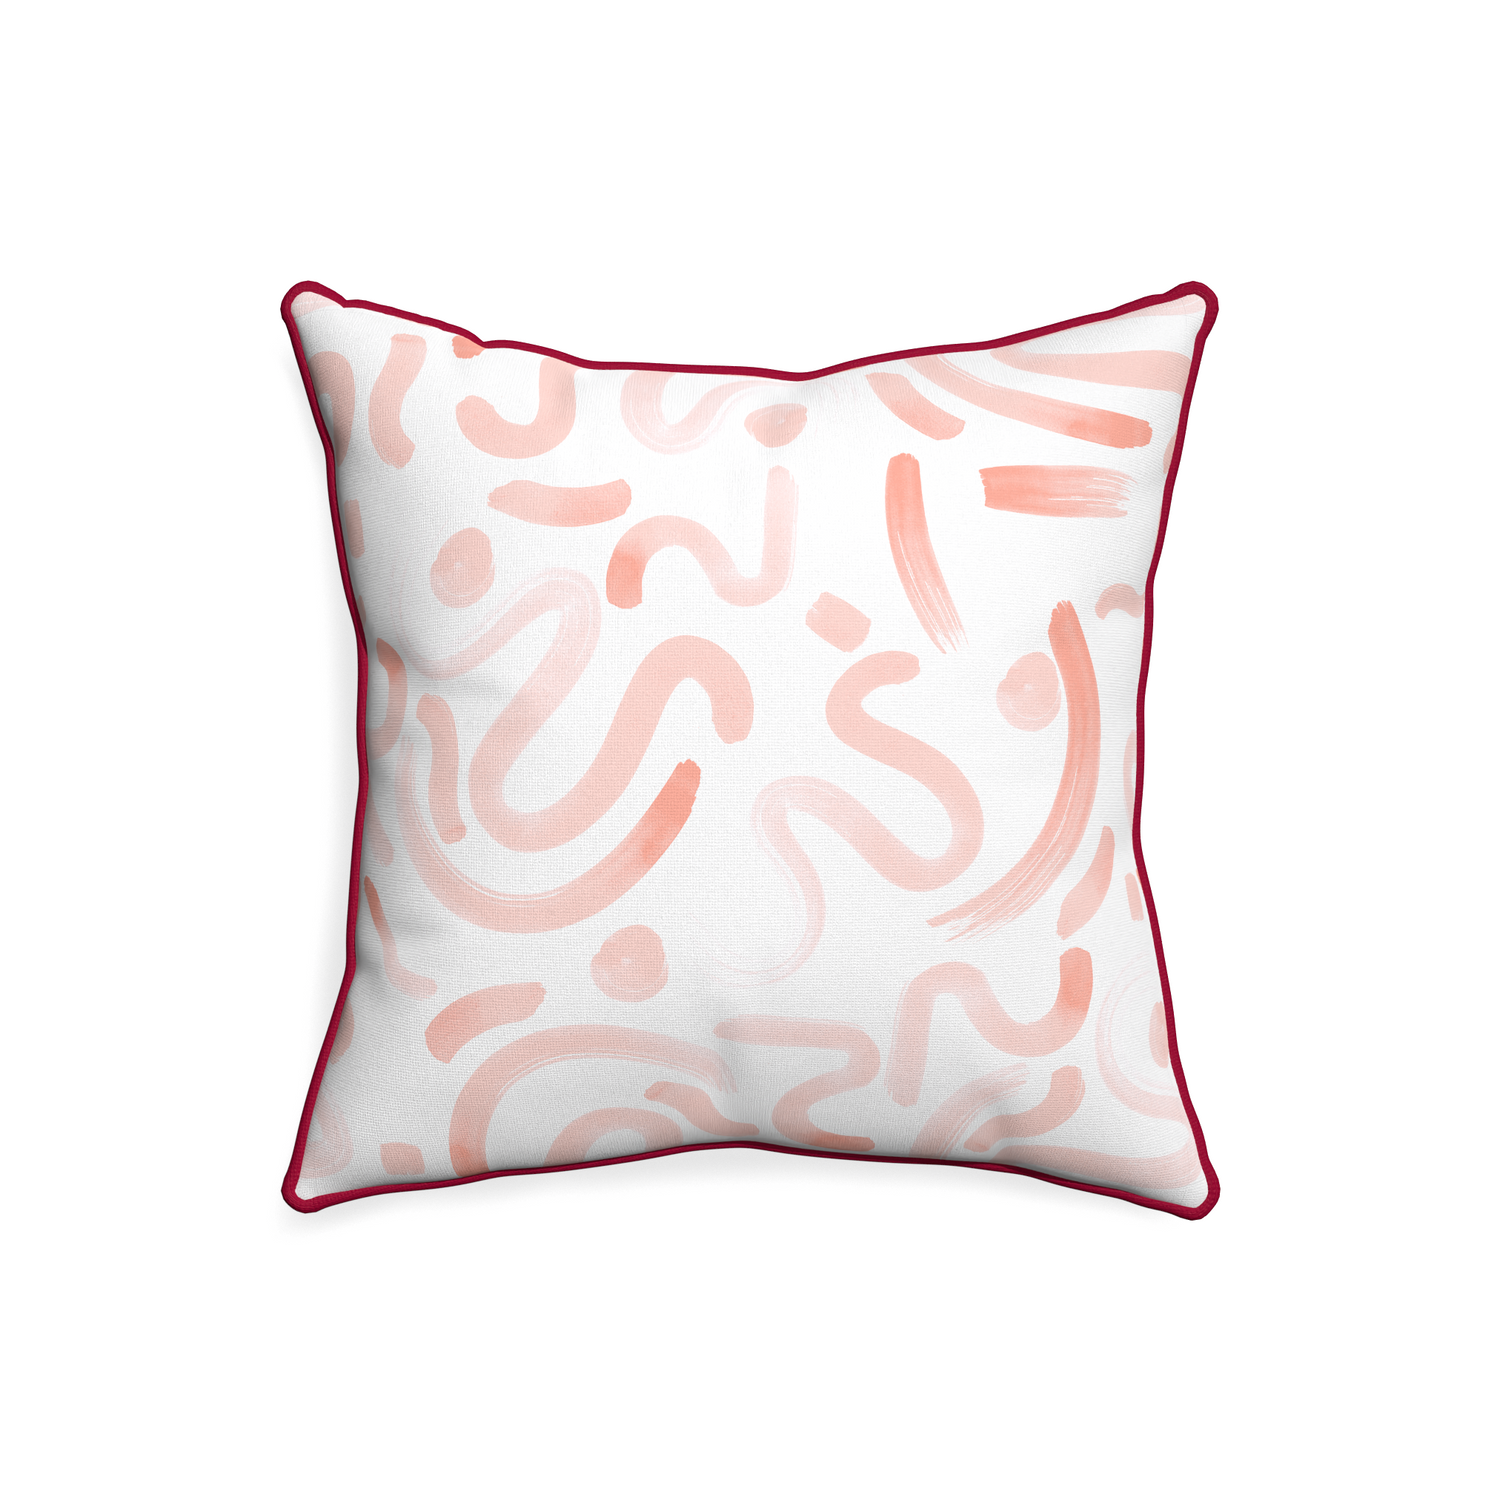 20-square hockney pink custom pillow with raspberry piping on white background